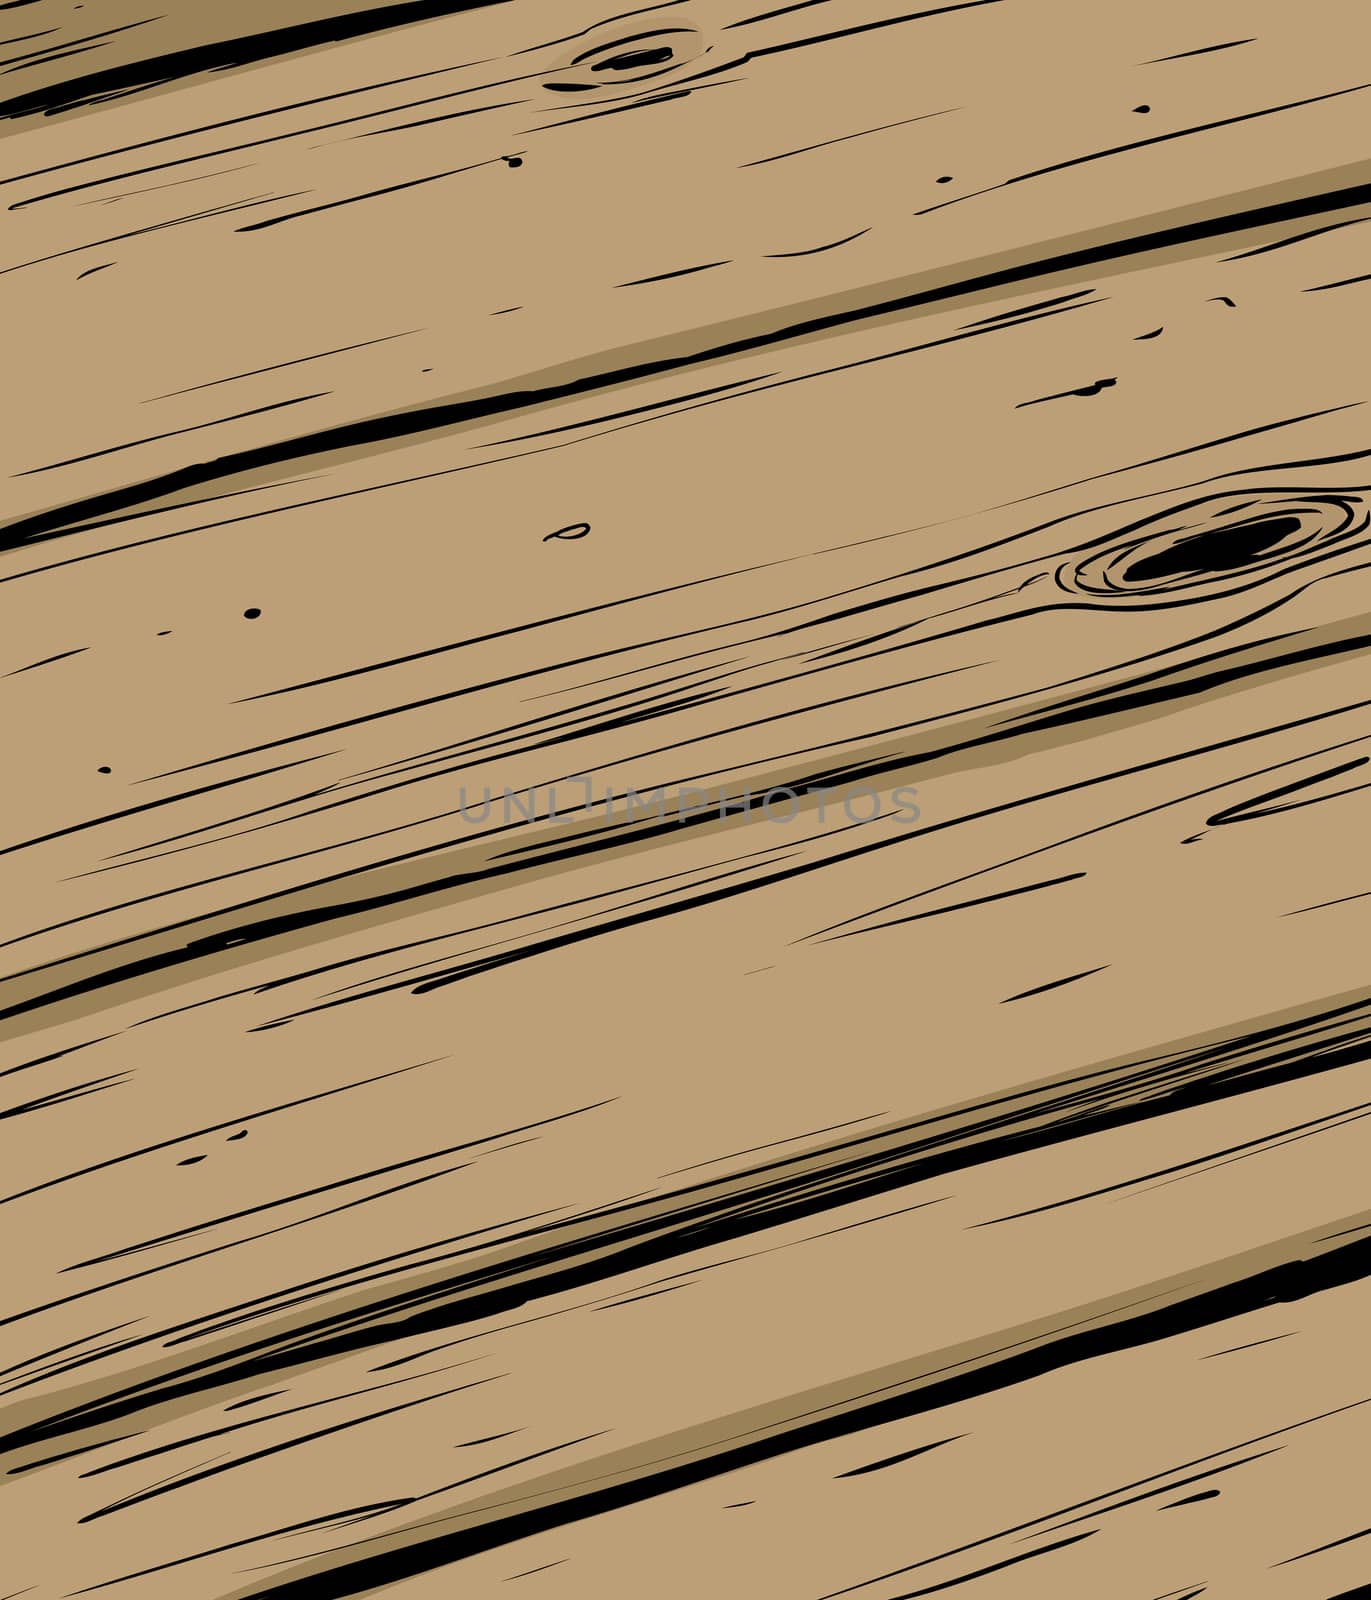 Wooden Planks Close Up by TheBlackRhino